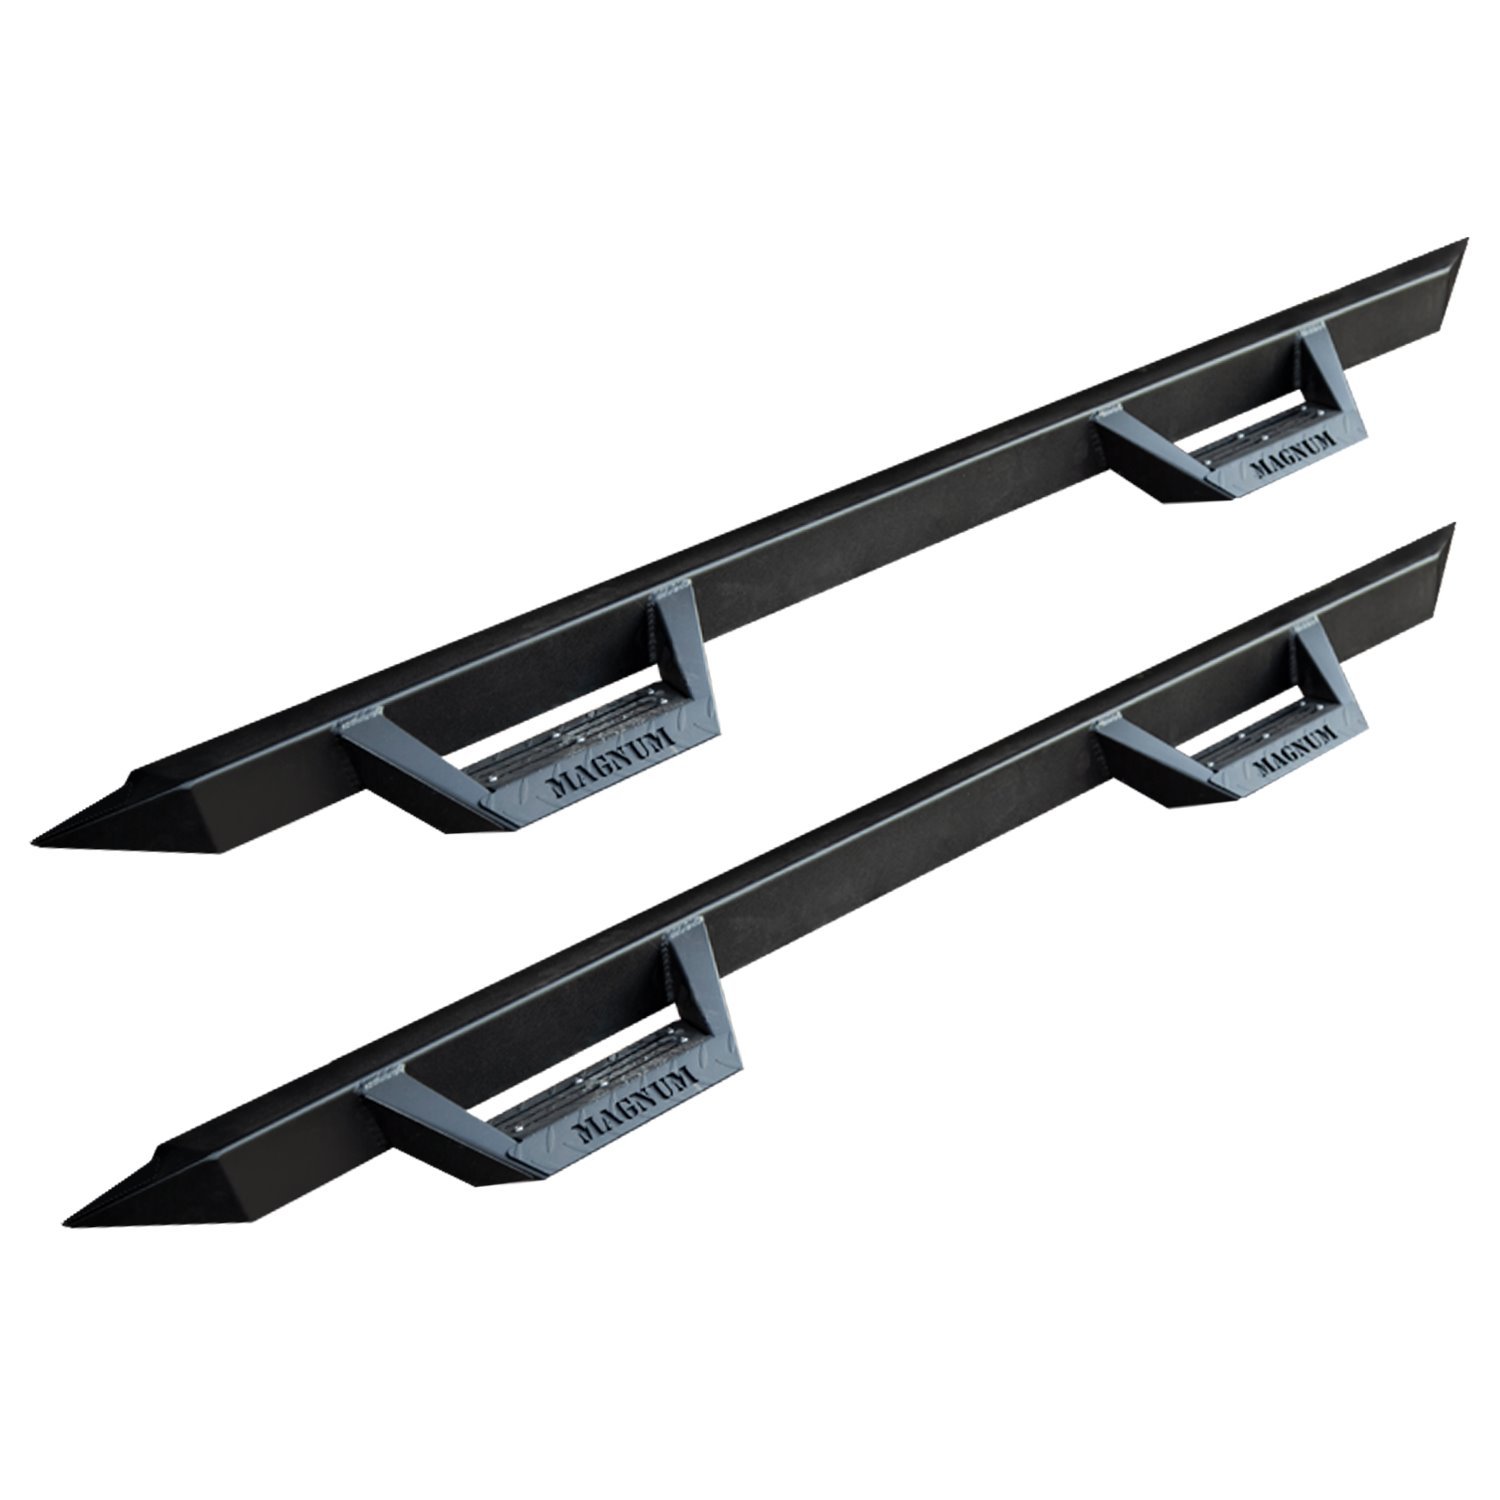 RTS37DG Magnum RT Drop Steps, Black Textured Alloy Steel, Fits Select Dodge Ram 1500 New Body Style Crew Cab